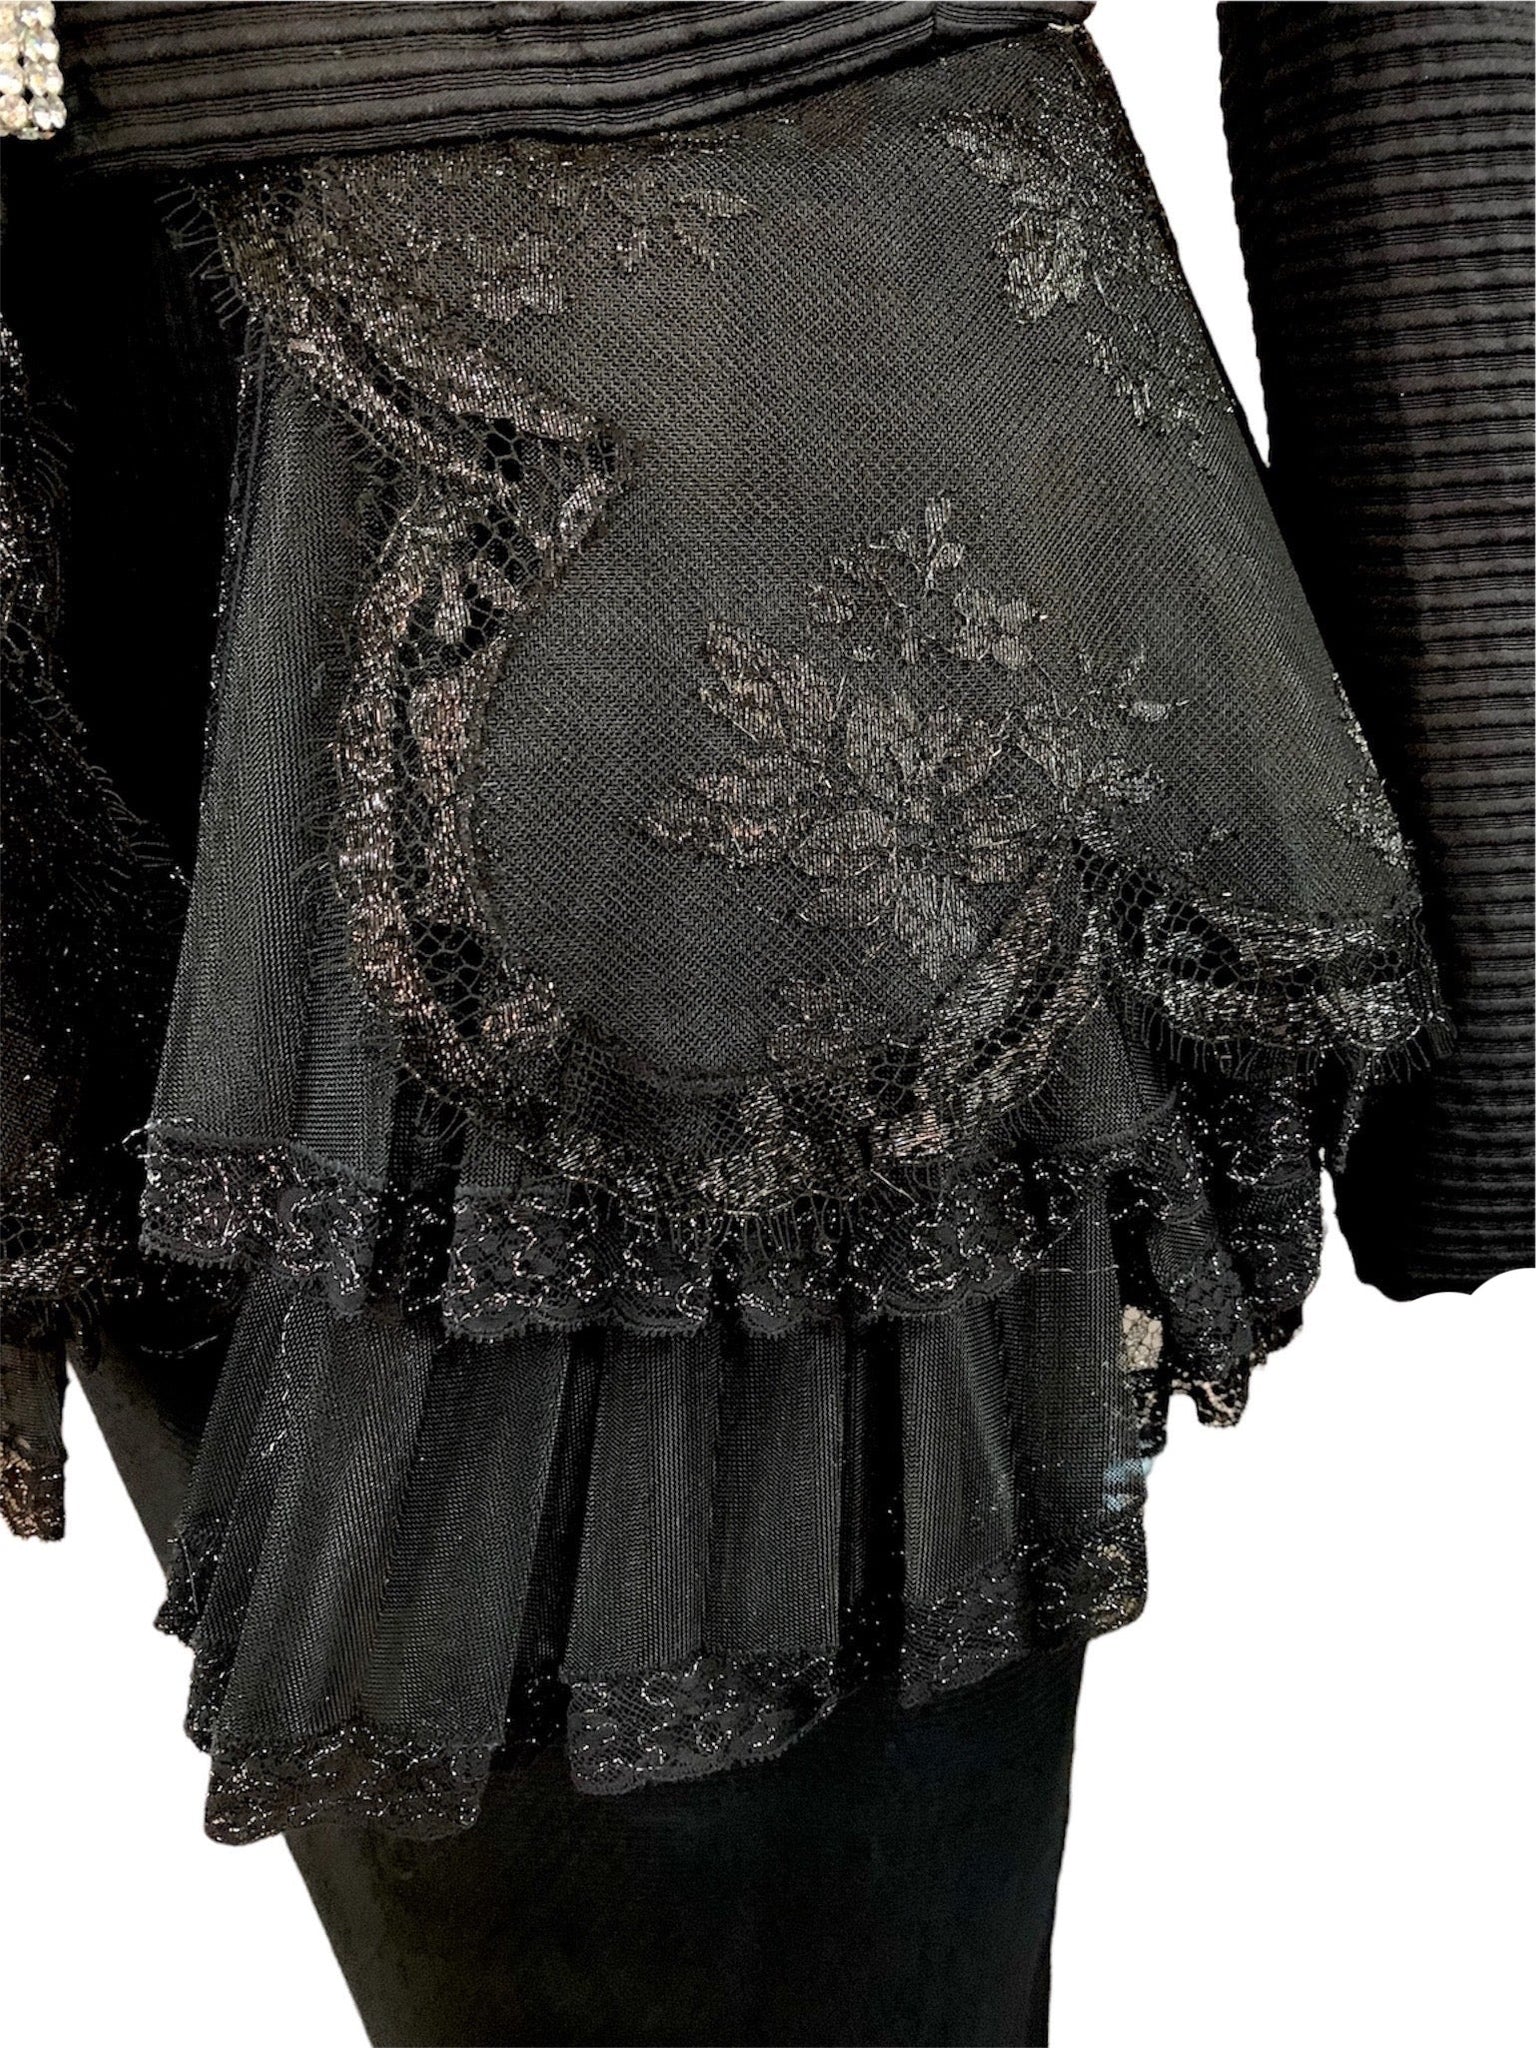 Gianfranco  Ferre 80s Black Evening Ensemble with Lace Peplum LACE DETAIL 6 of 8